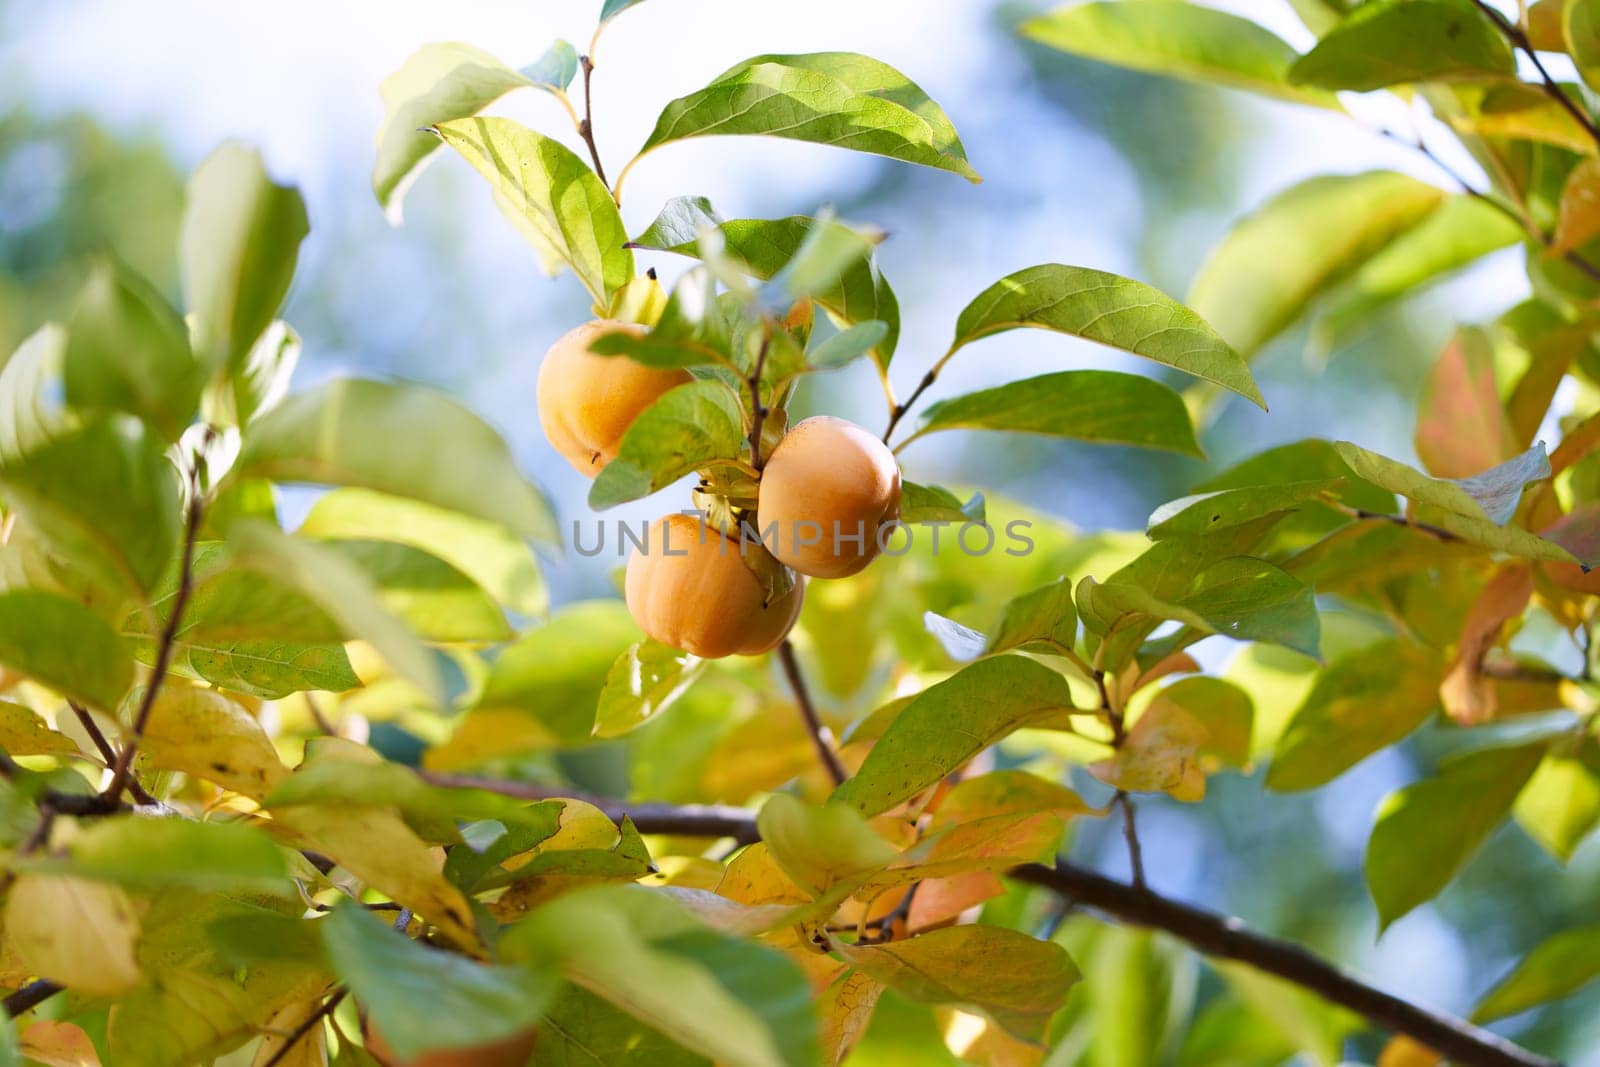 Orange persimmon hanging on green branches in sunlight by Nadtochiy